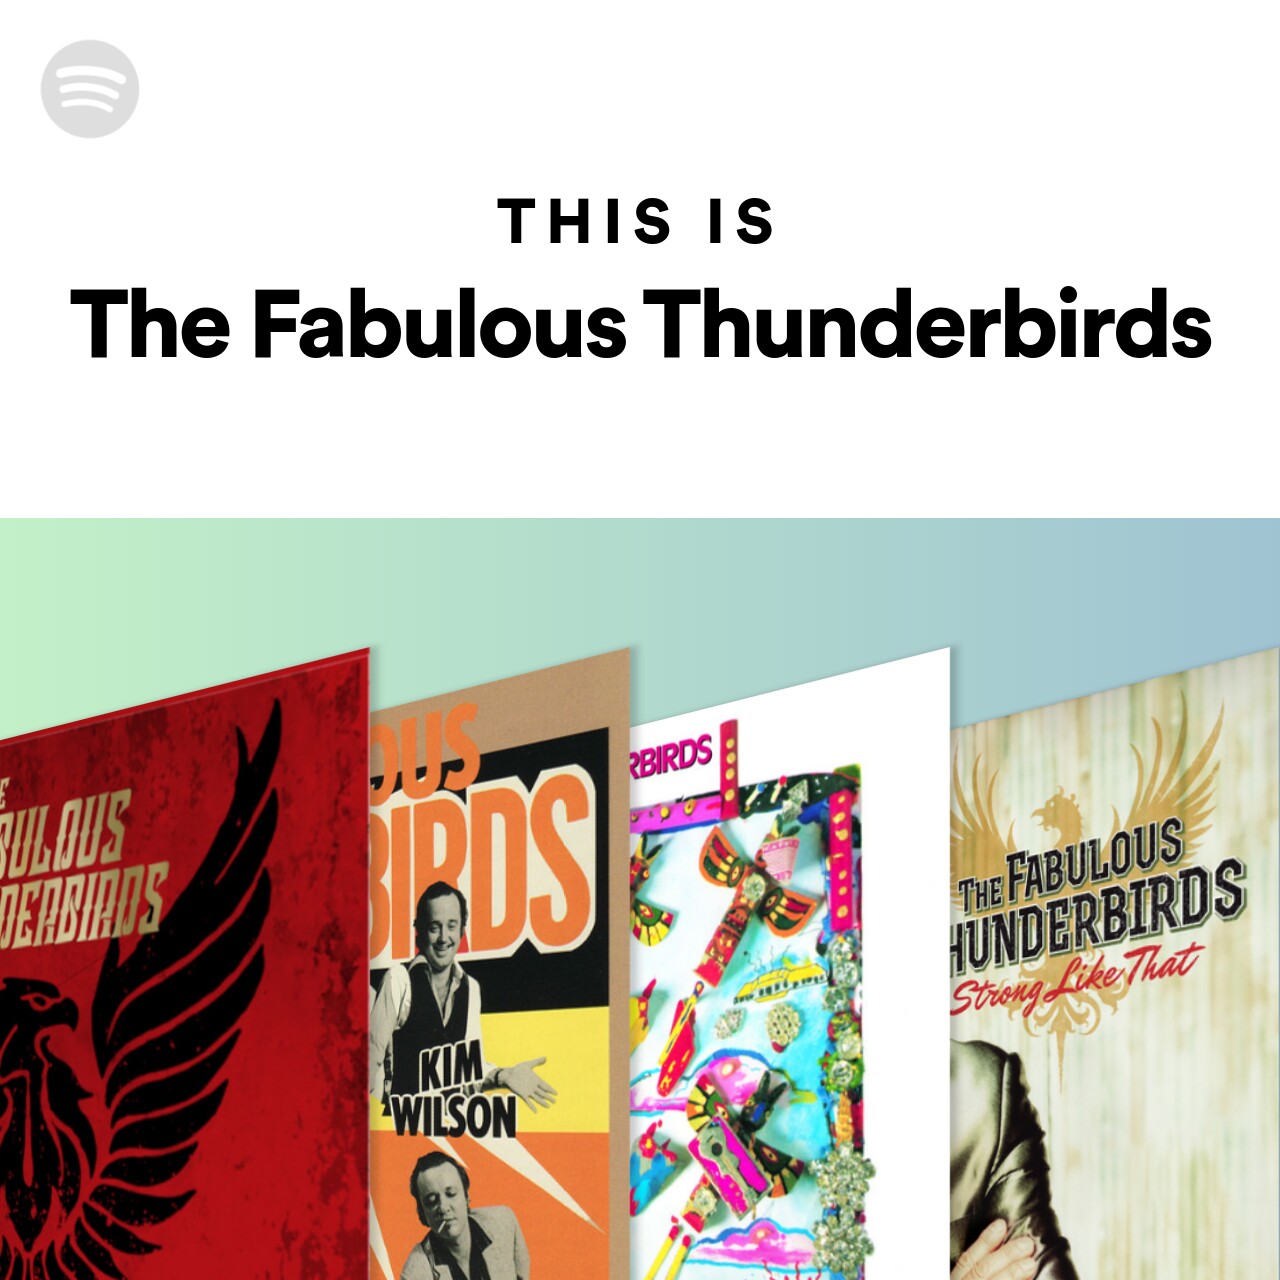 This Is The Fabulous Thunderbirds